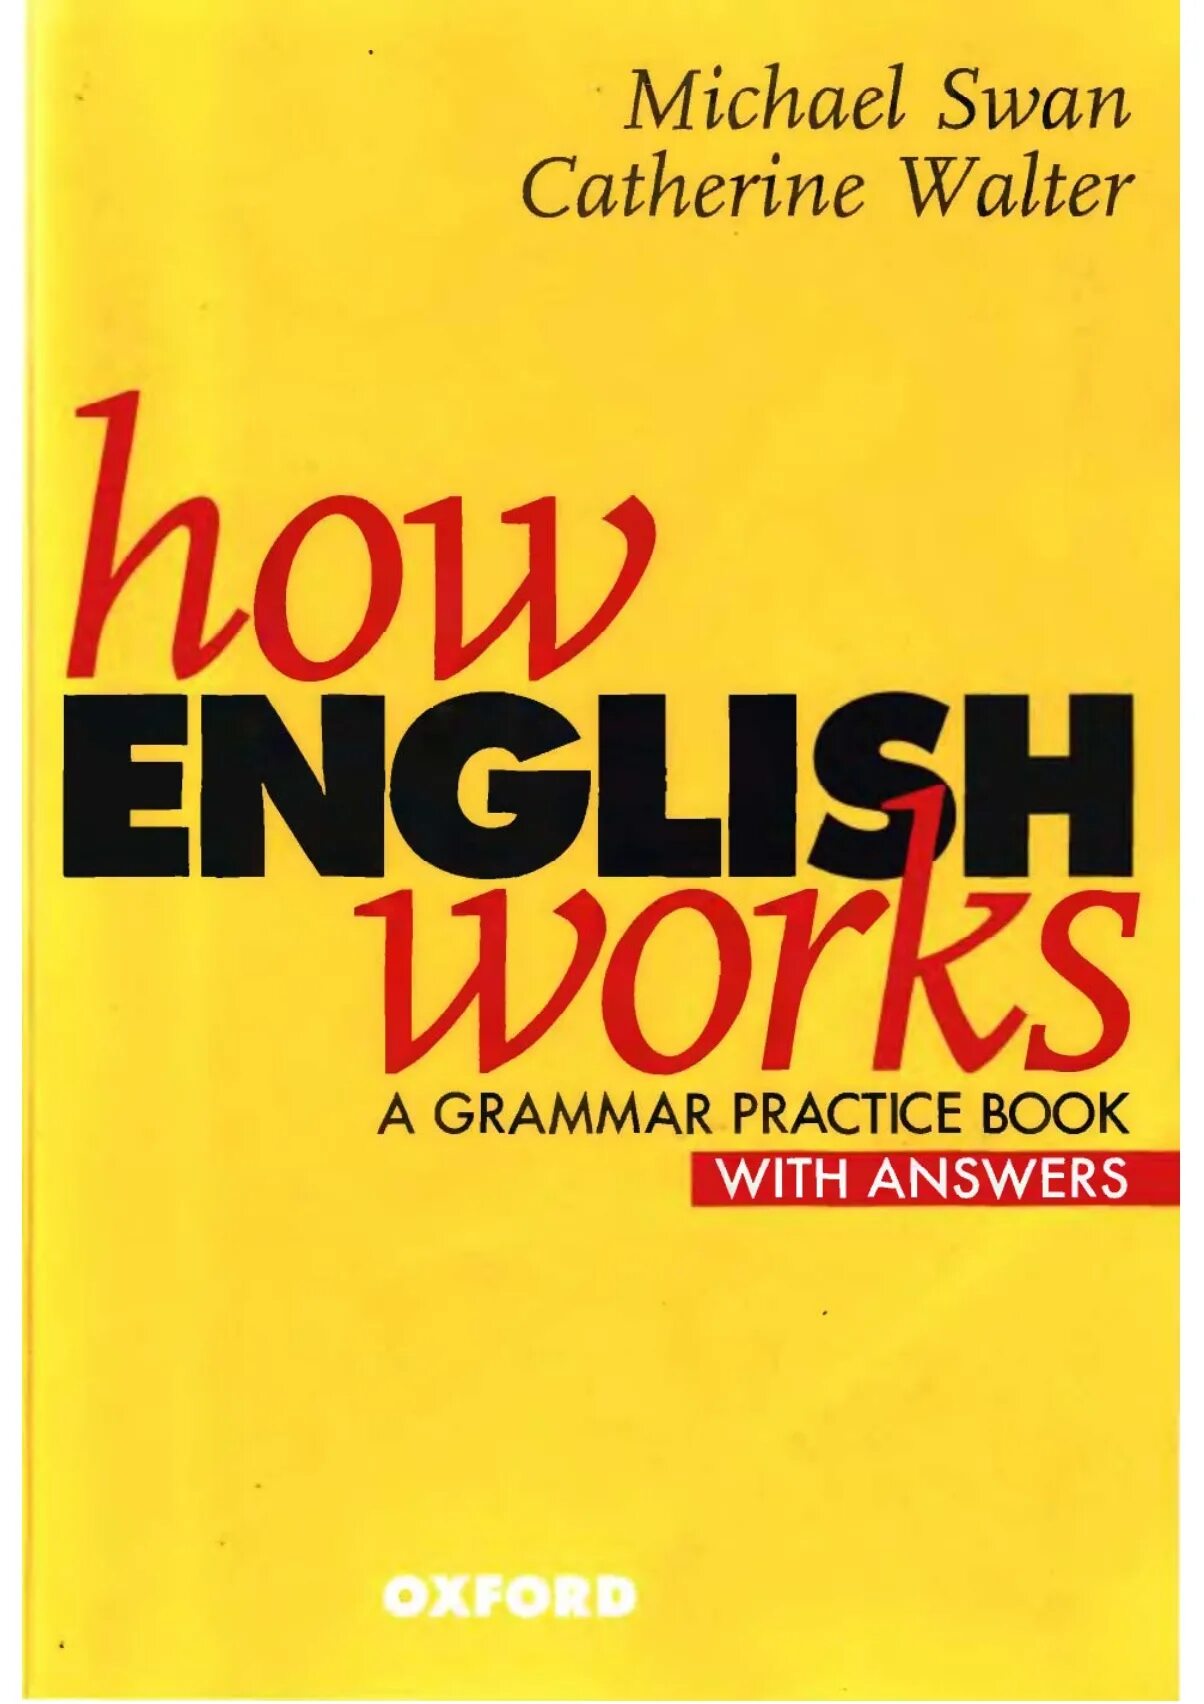 Michael Swan, Catherine Walter “how English works. A Grammar Practice book”, Oxford University Press. Swan how English works. Michael Swan Grammar.